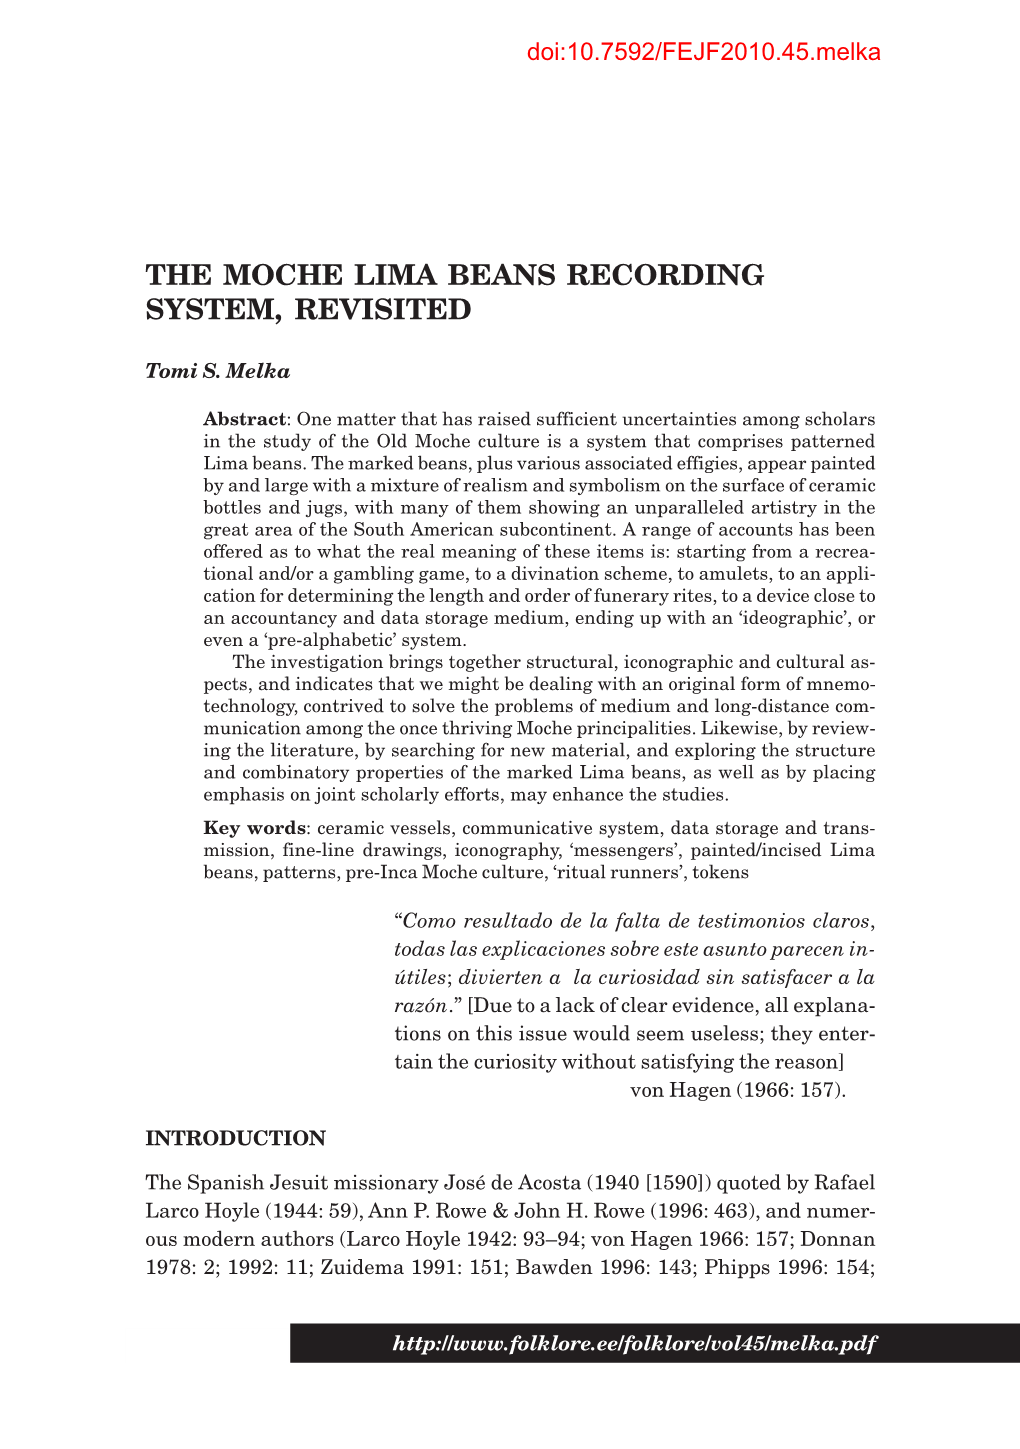 The Moche Lima Beans Recording System, Revisited